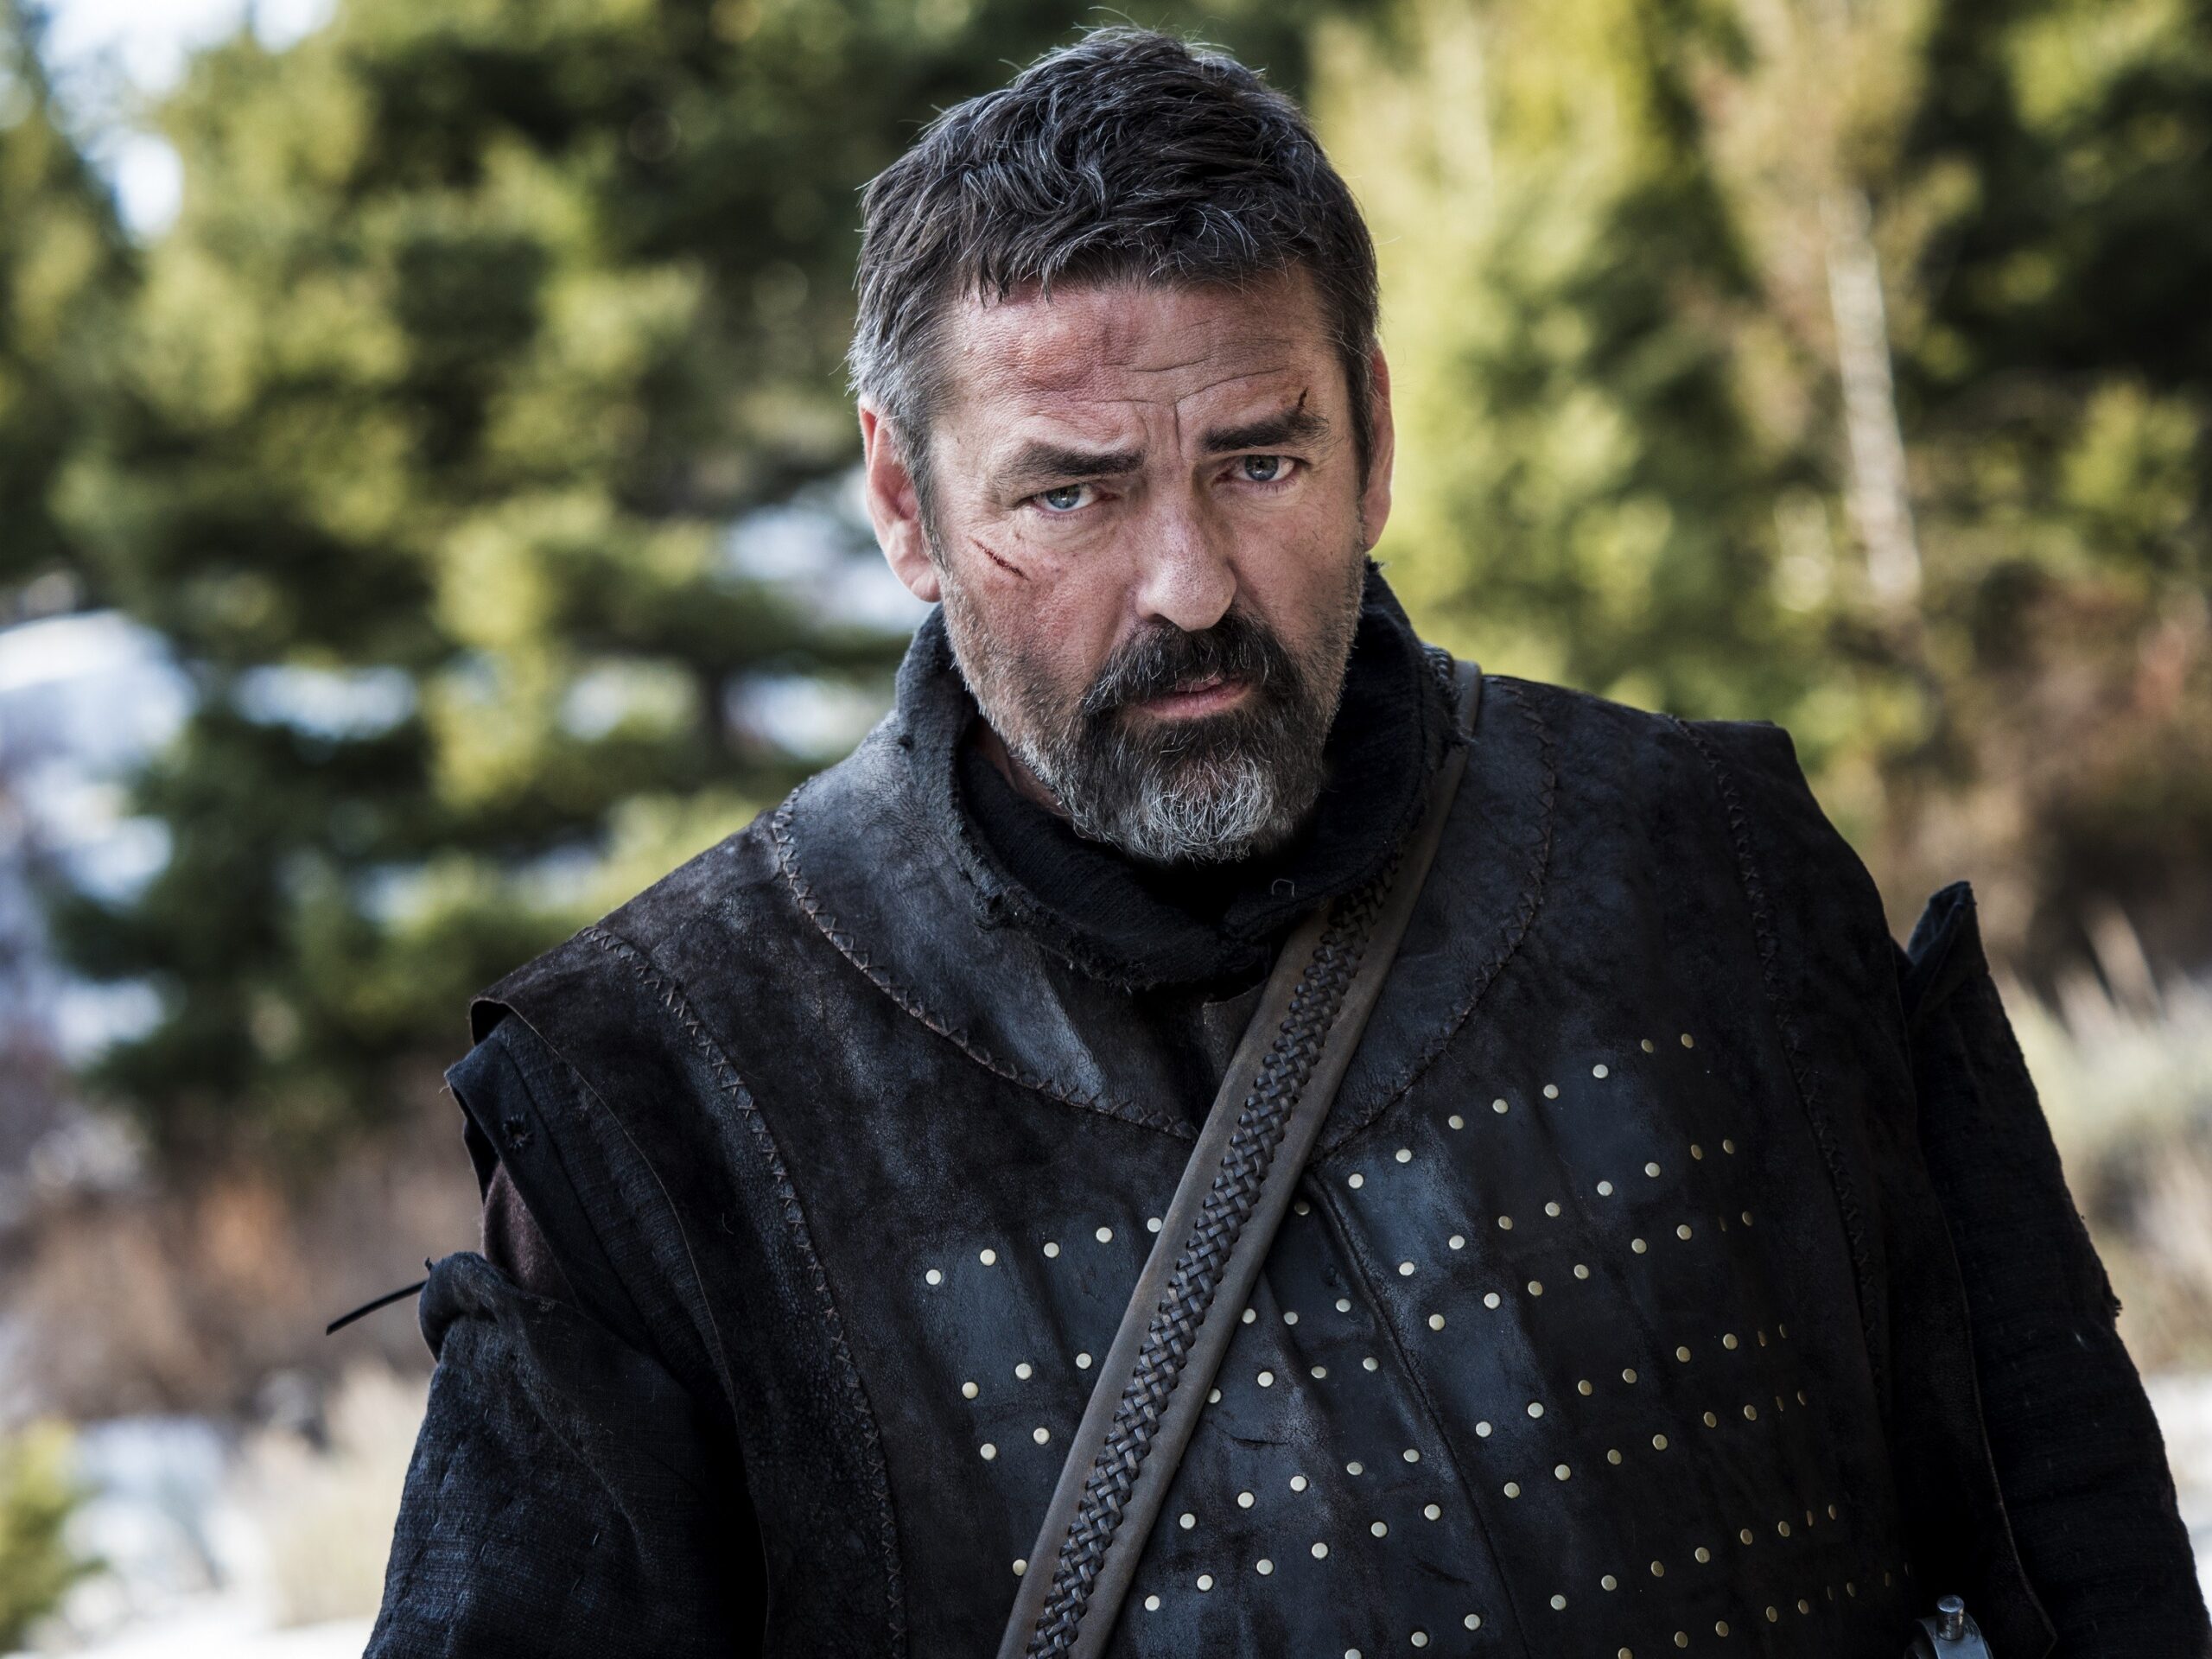 Review: ‘Robert The Bruce’Angus Macfadyen Returns To Save Scotland In A Historical Drama Free Of The 'Braveheart' Bloodlust